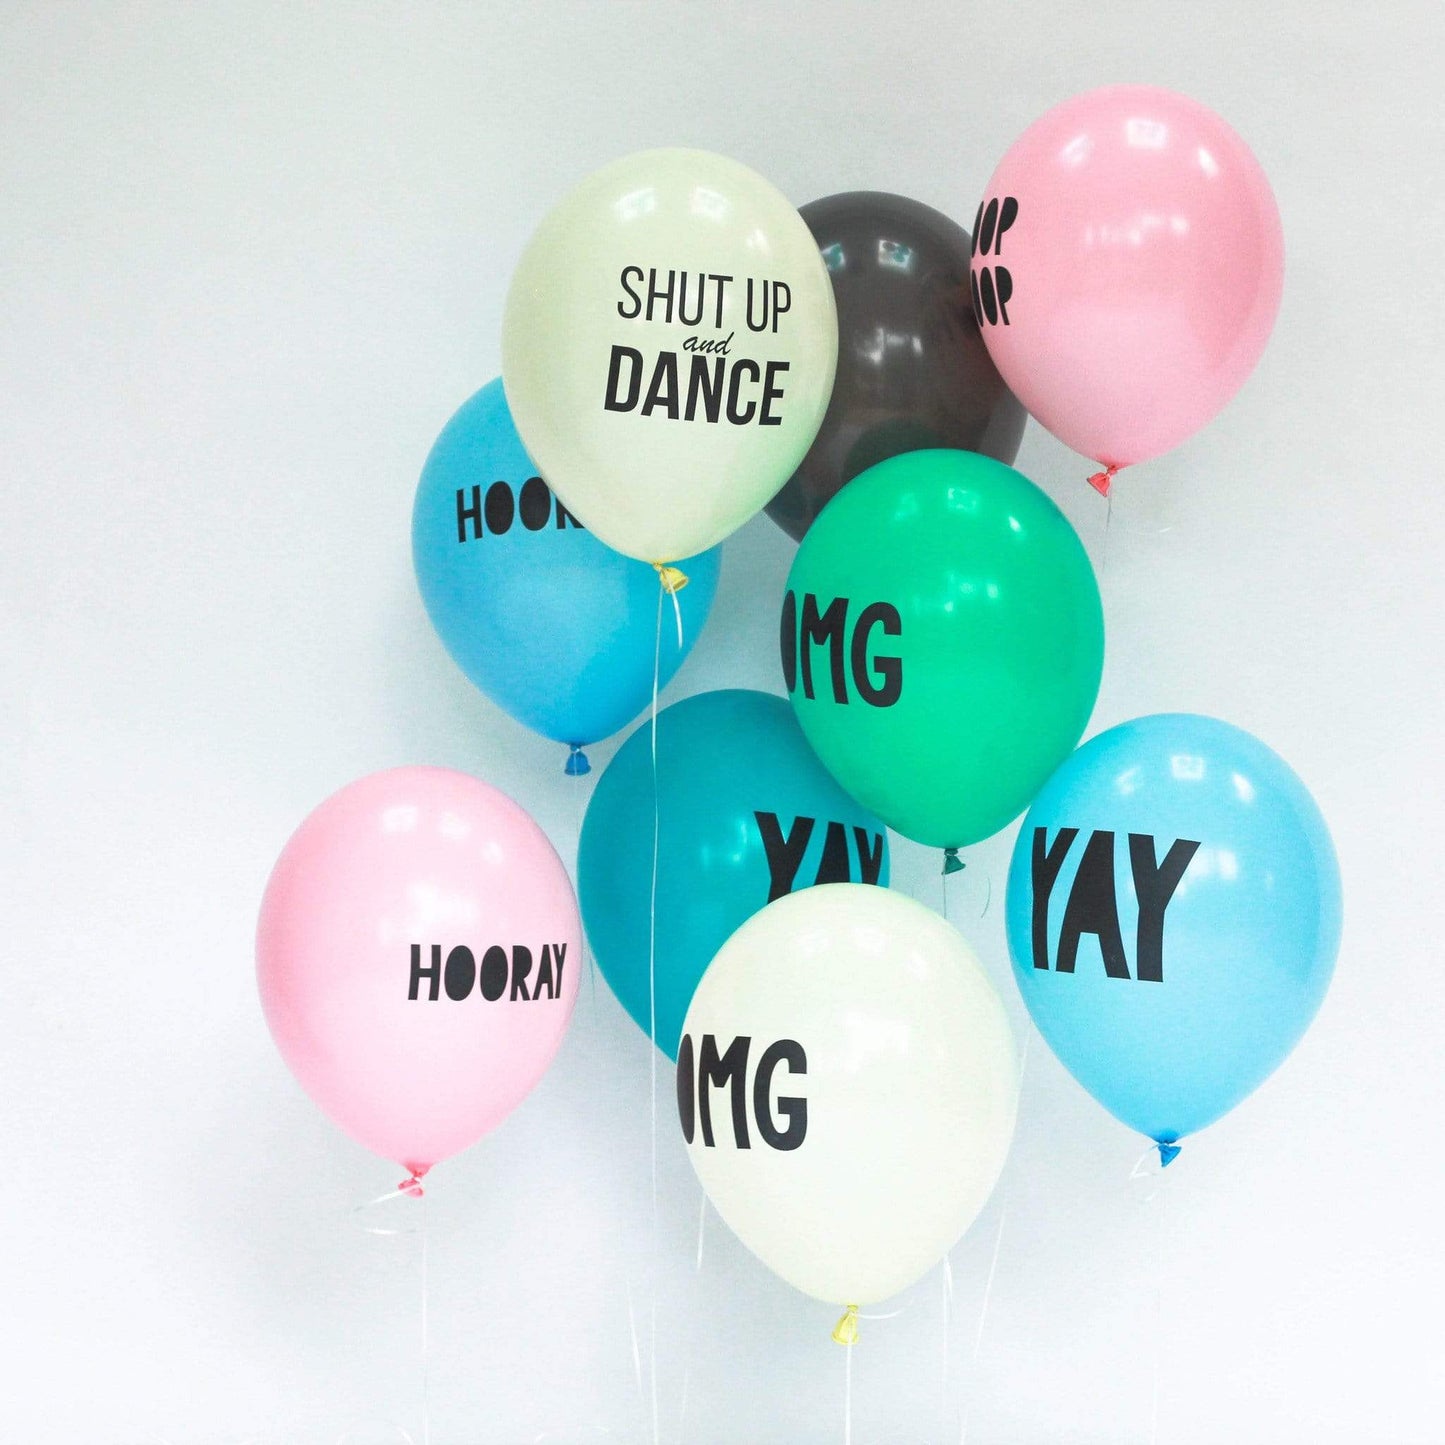 Yay Balloons Cream - Pretty Little Party Shop UK Pretty Little Party Shop